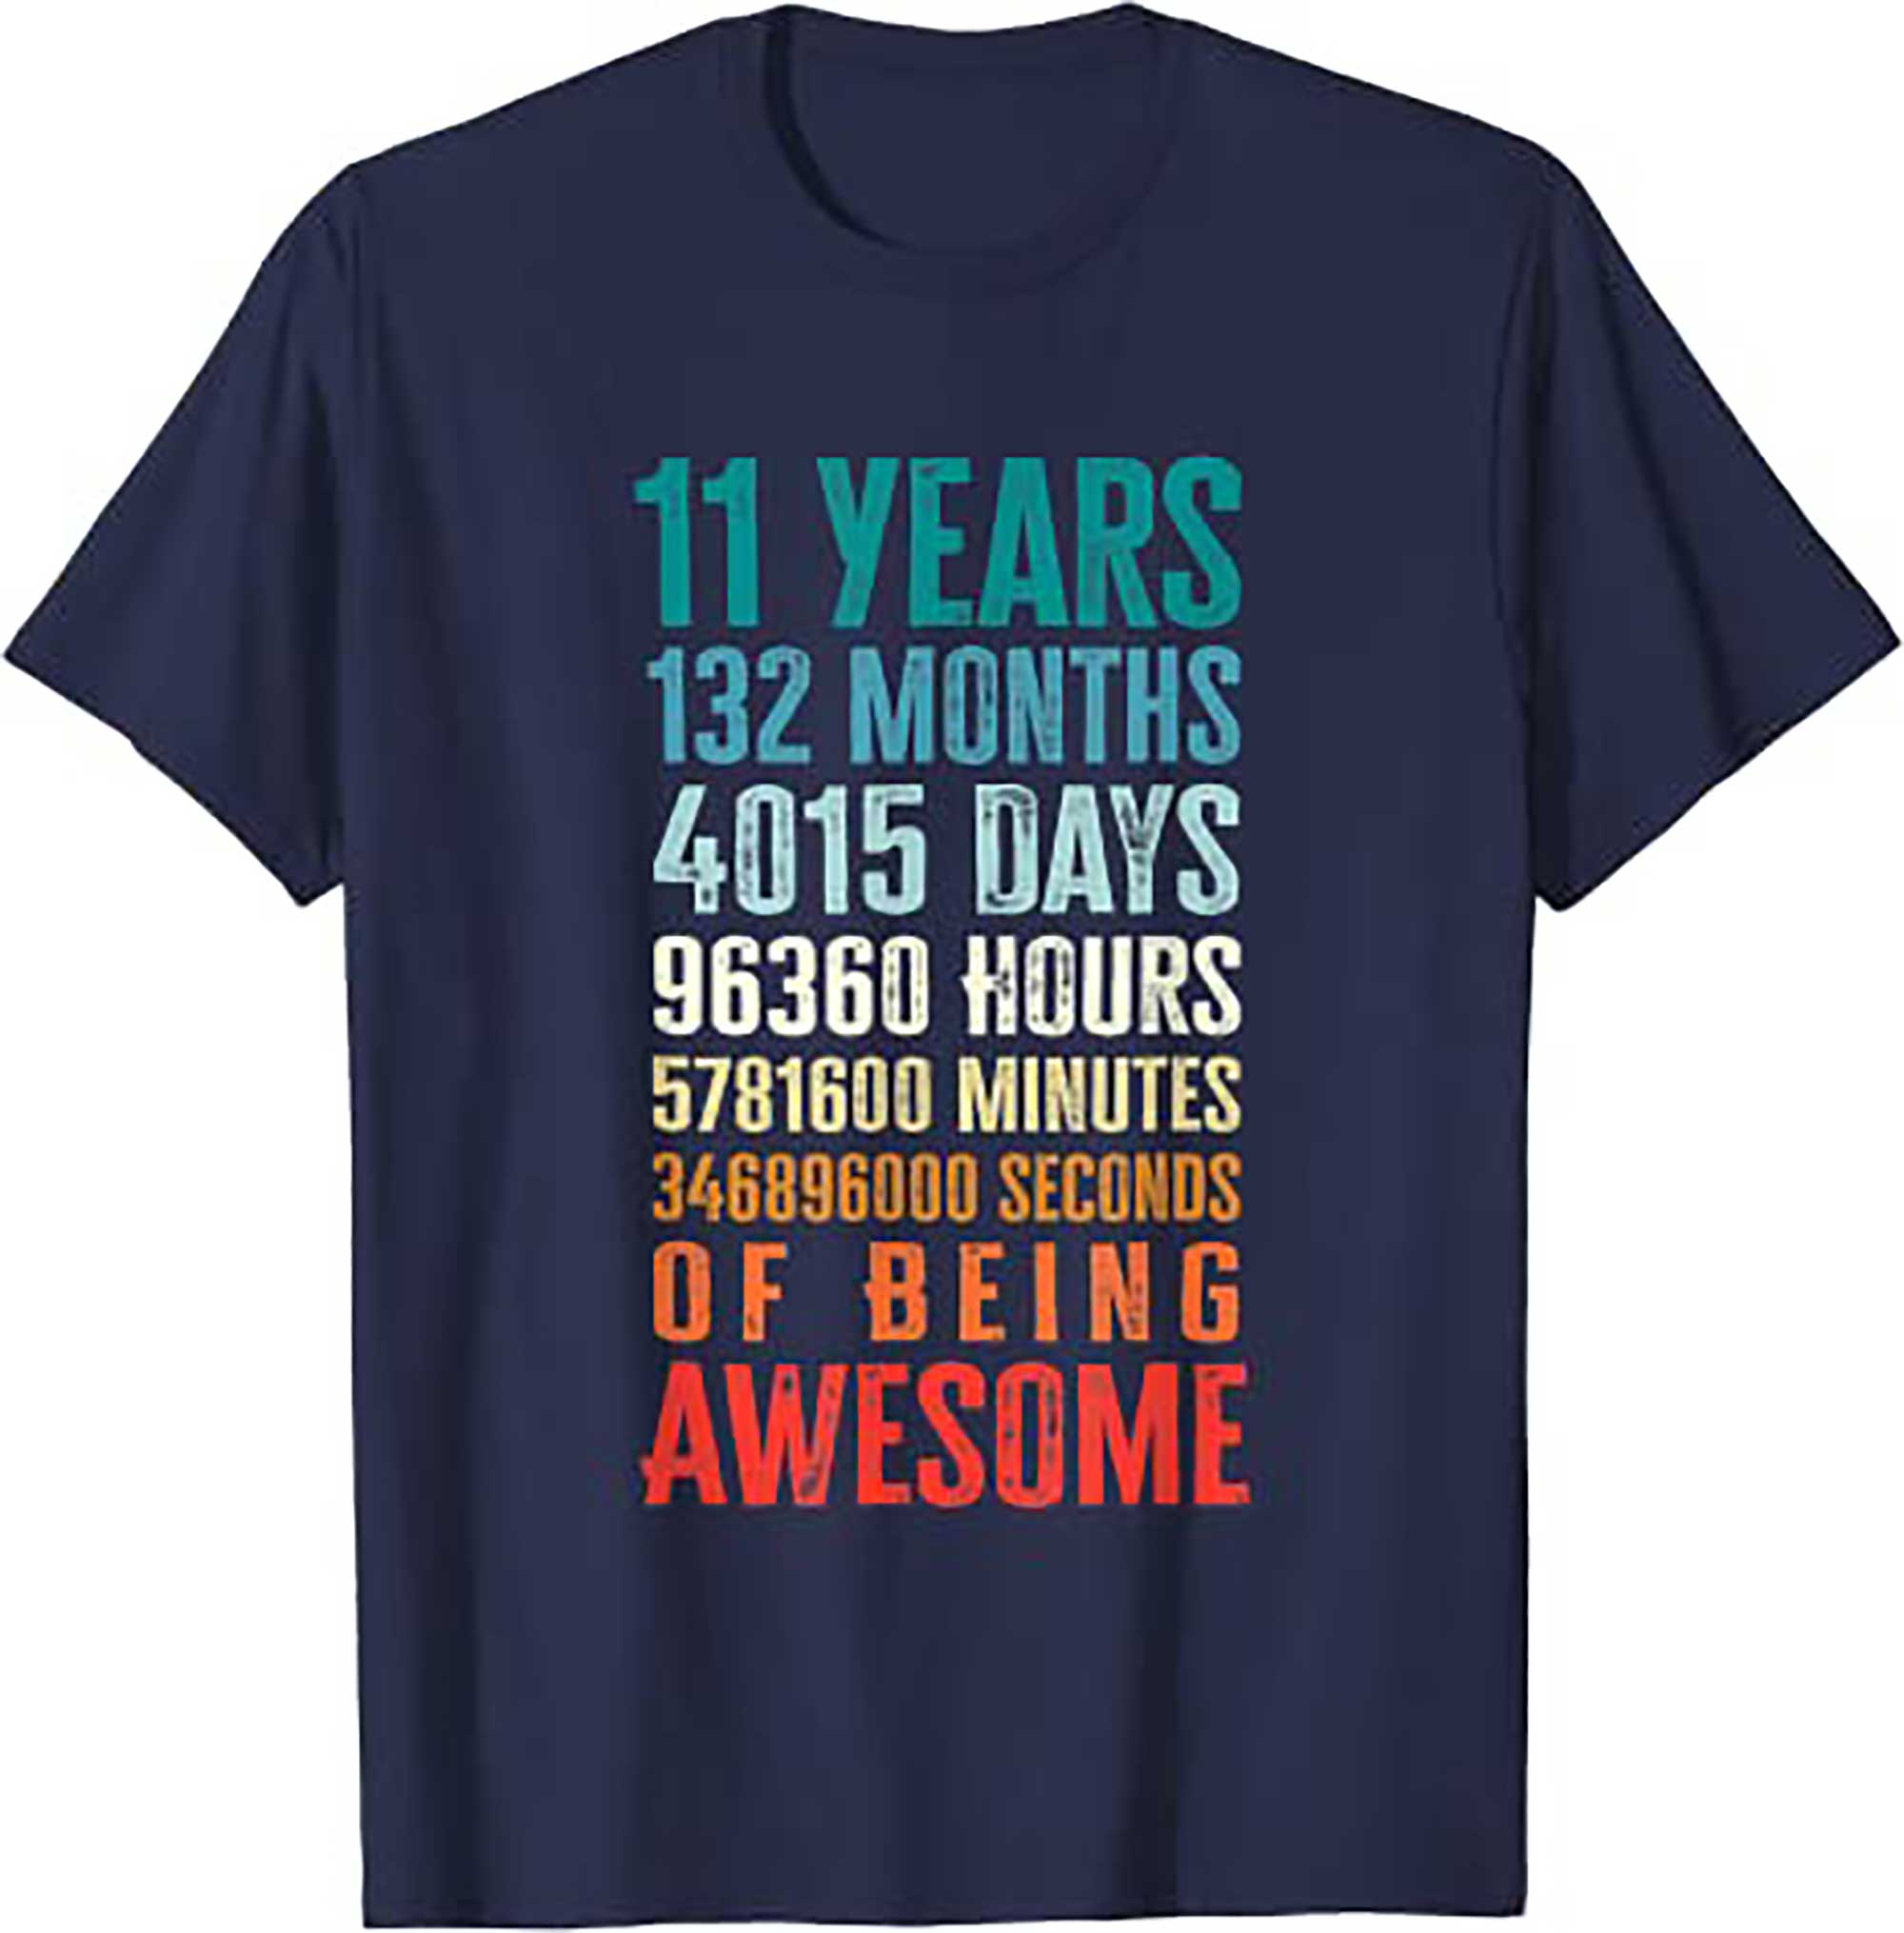 Skitongift 11 Years 132 Months Of Being Awesome 11th Birthday Gifts T Shirt